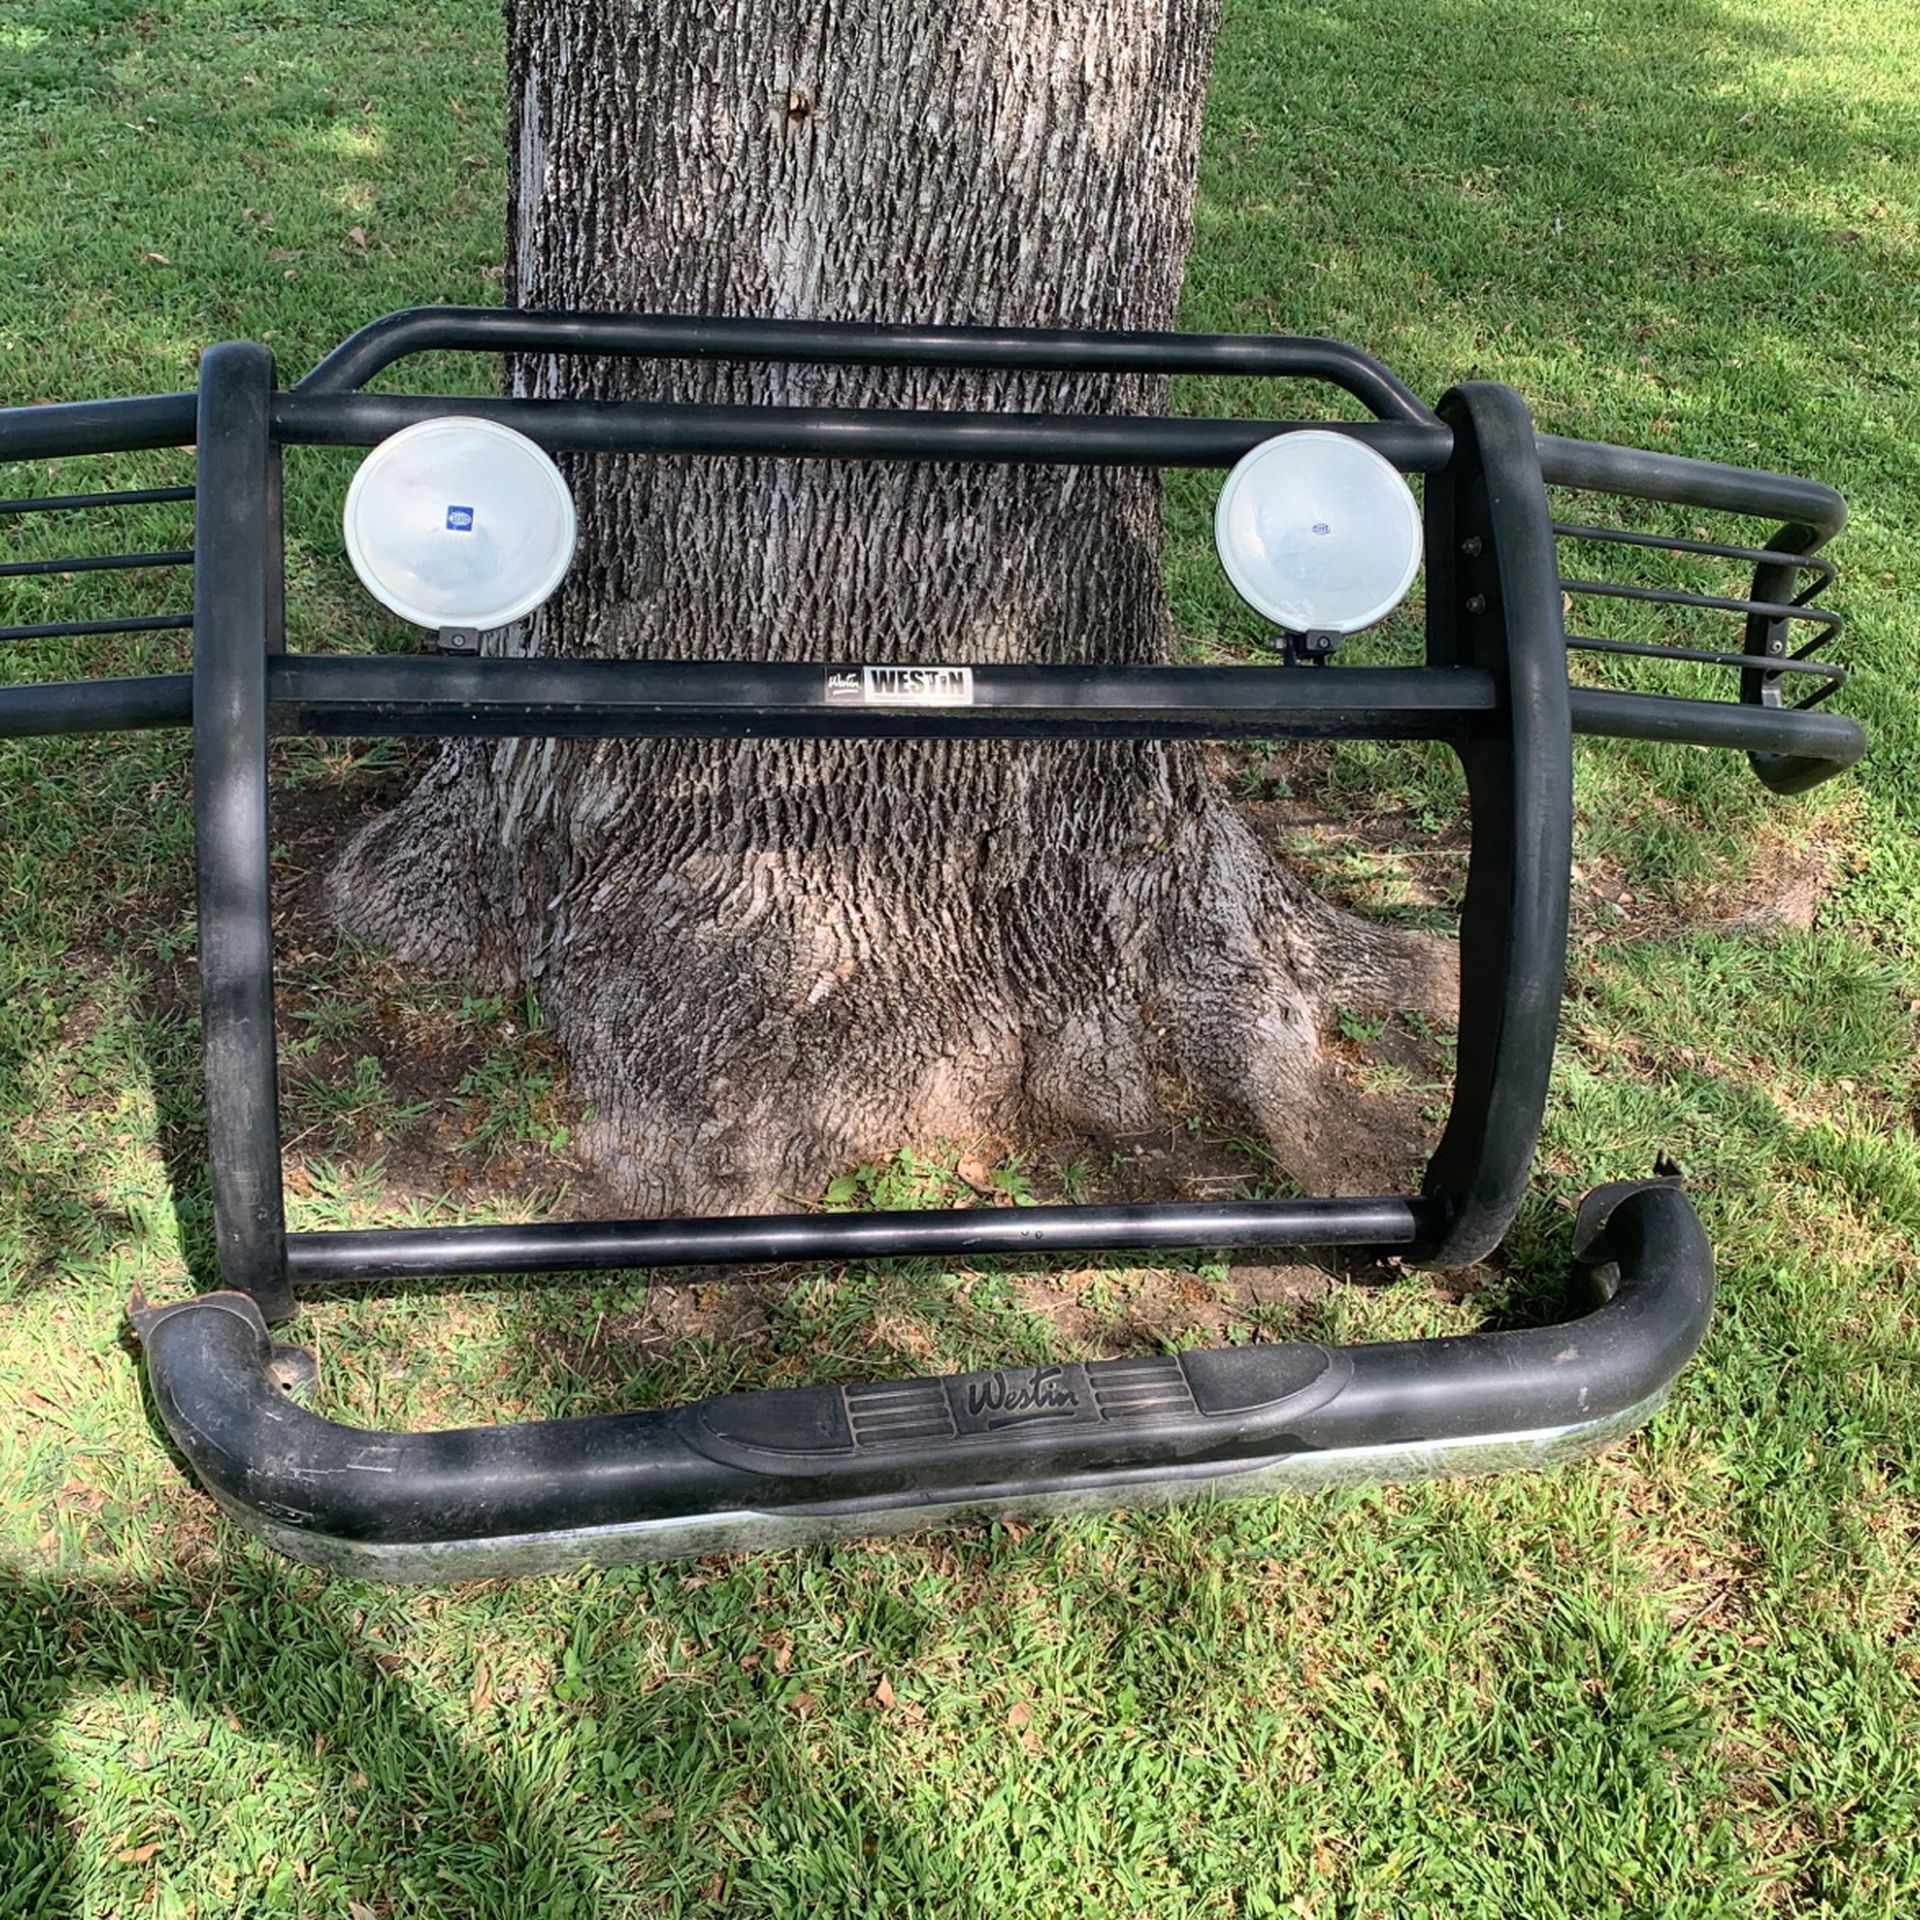 Small Pickup Or Jeep Bumper Guard With Fog Lights And 2 Step Bars All For One Price Of $40